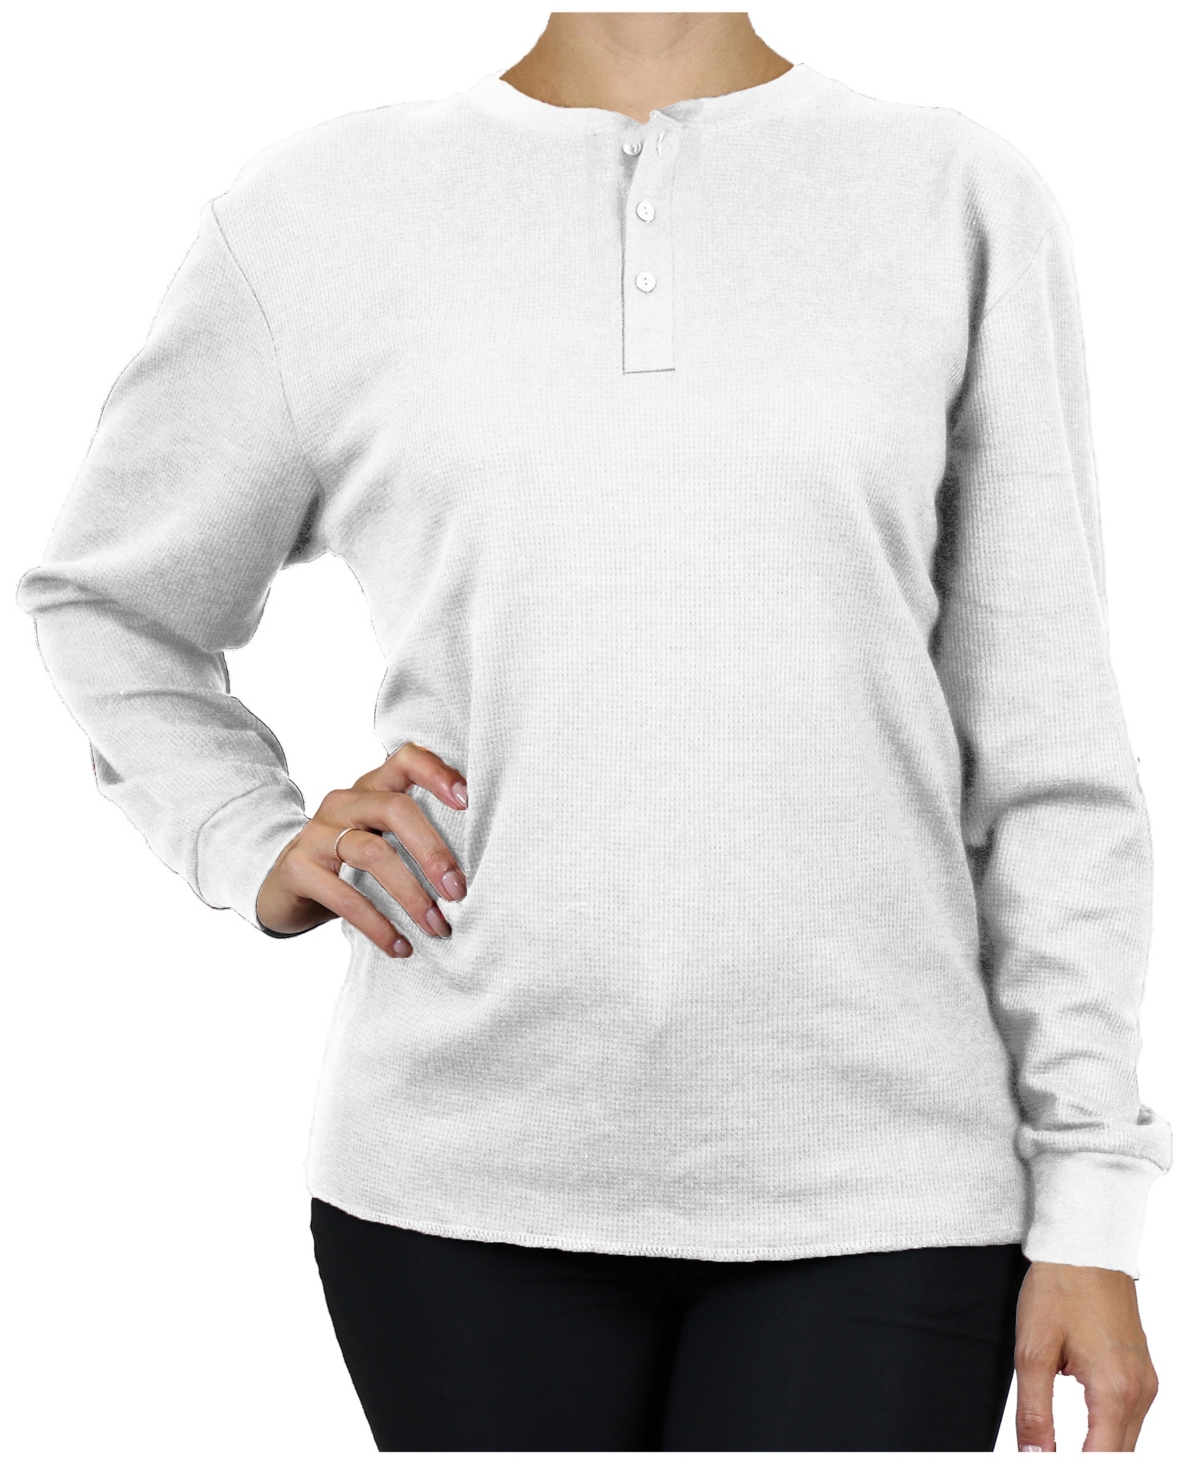 Galaxy By Harvic Women's Oversize Loose Fitting Waffle-knit Henley Thermal Sweater In White